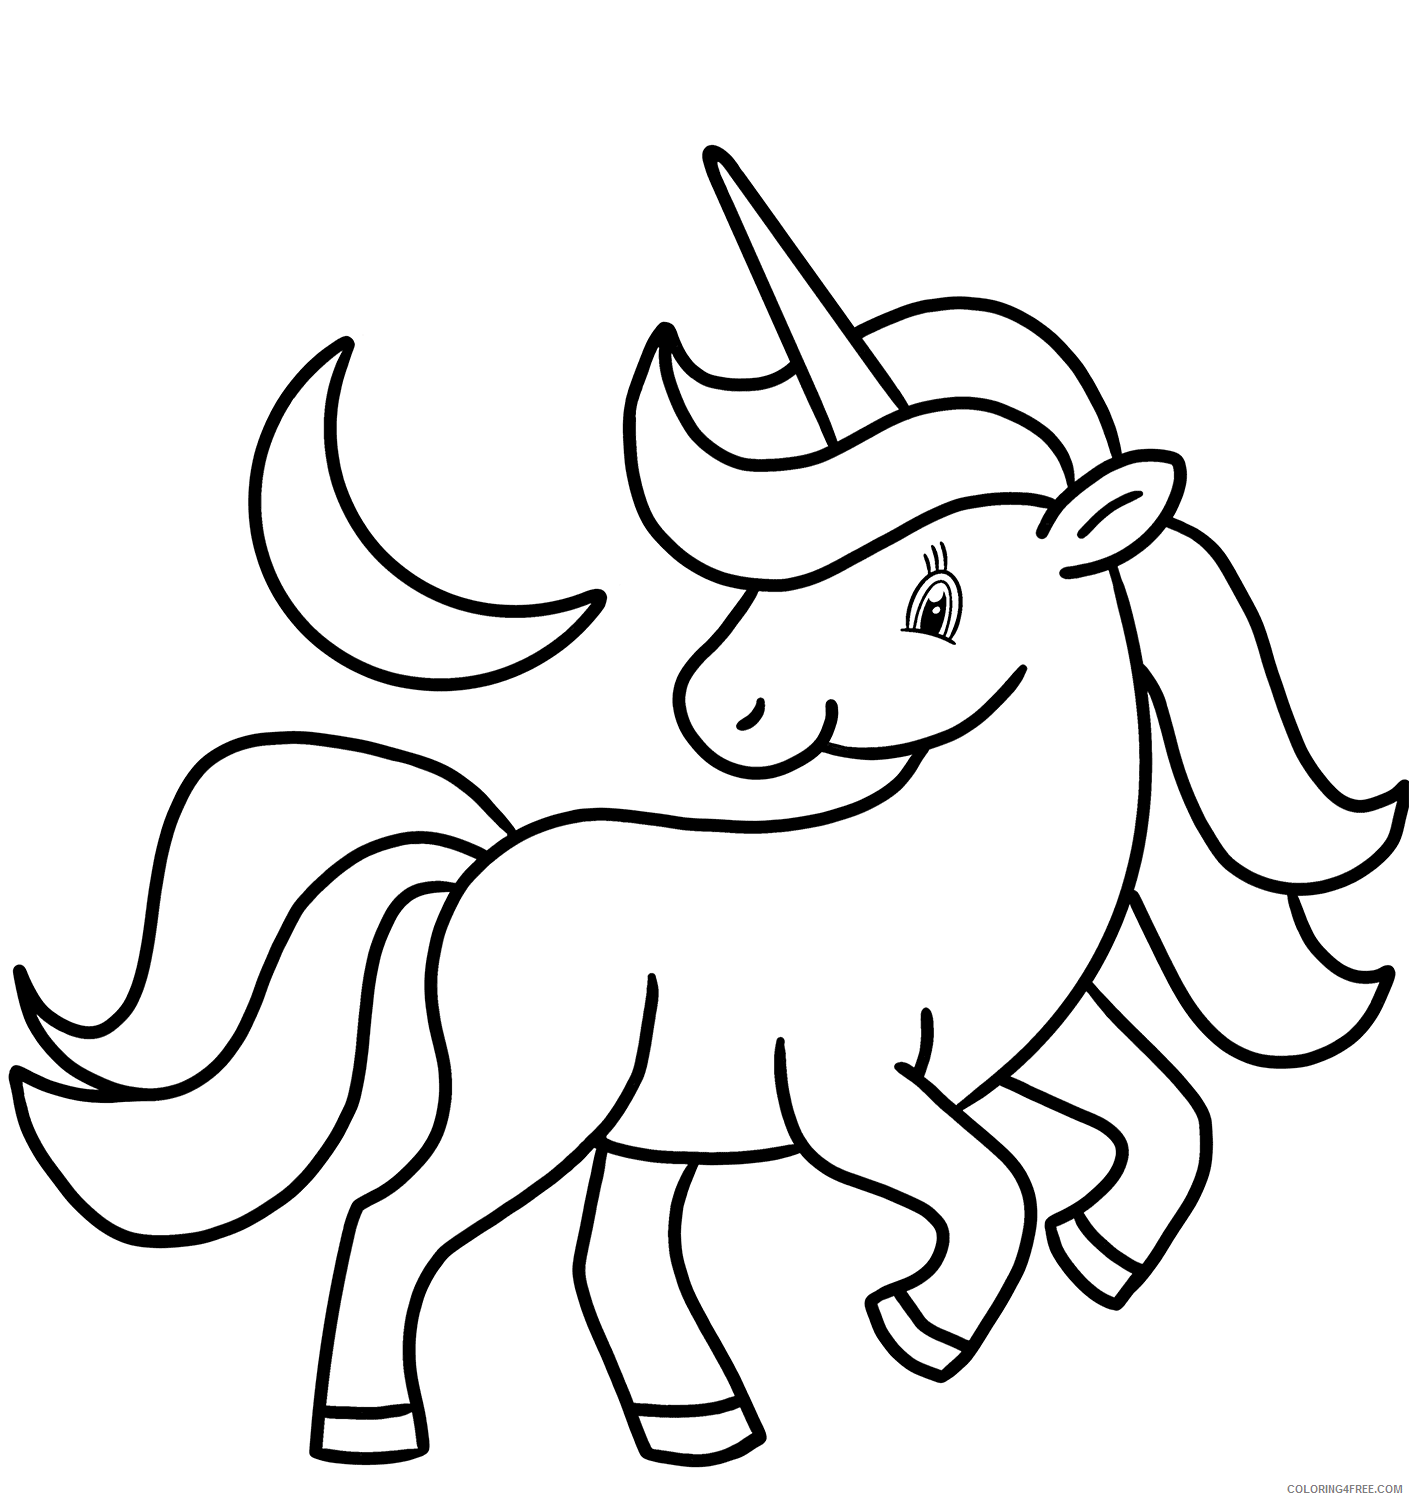 Unicorn Coloring Pages unicorn and crescent moon Printable 2021 6067 Coloring4free